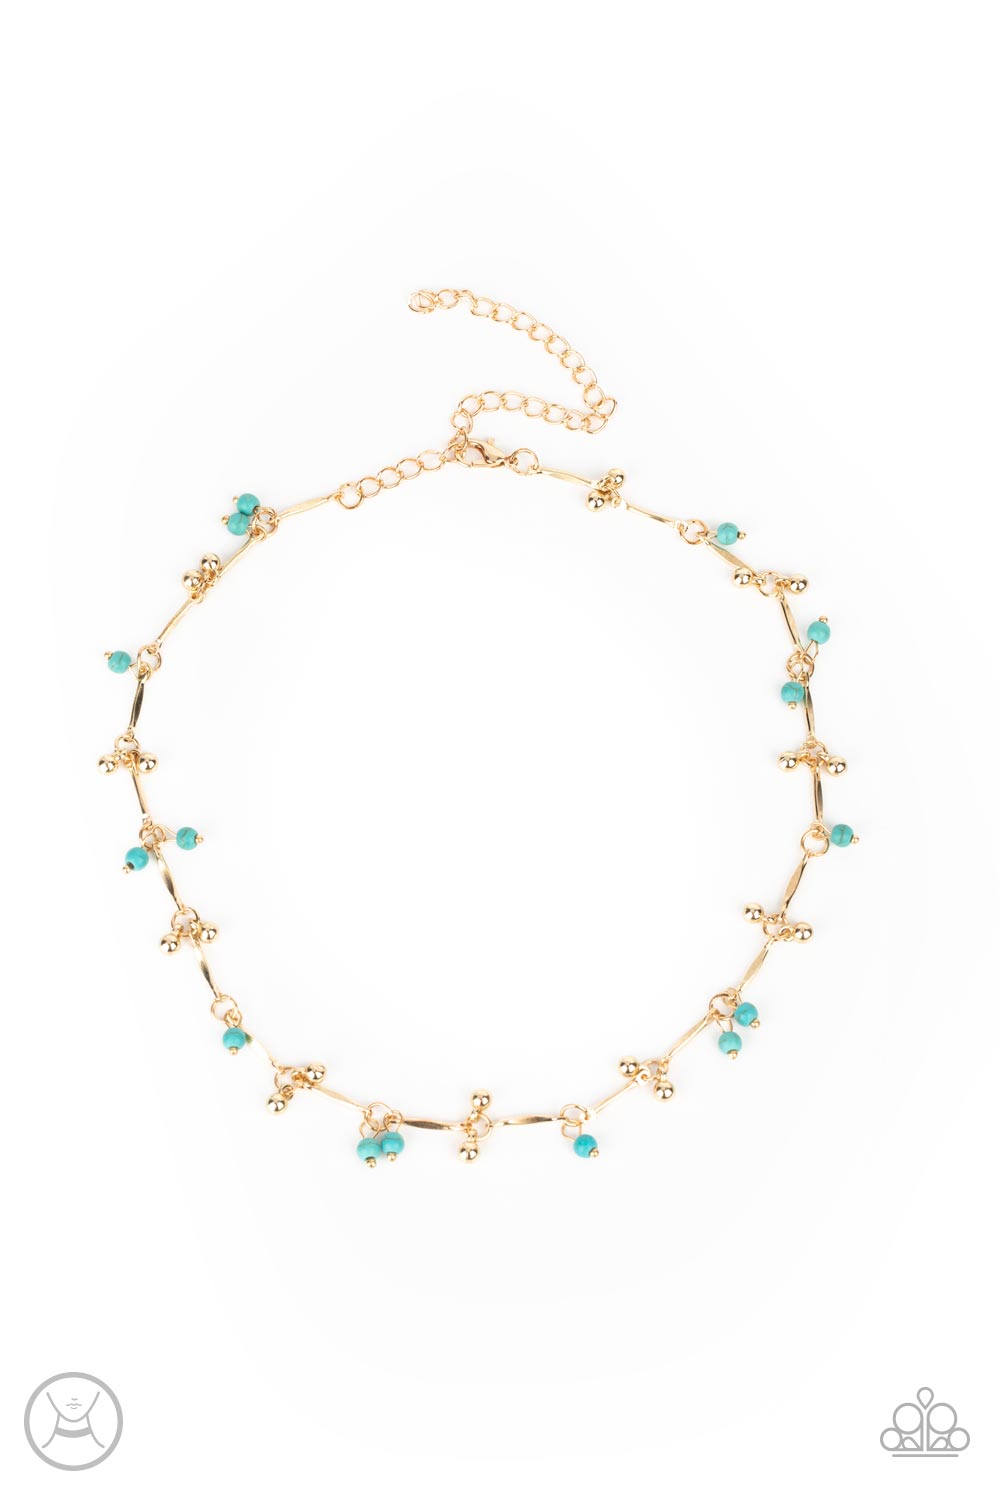 Sahara Social - Gold and Turquoise Choker Necklace - Paparazzi Accessories